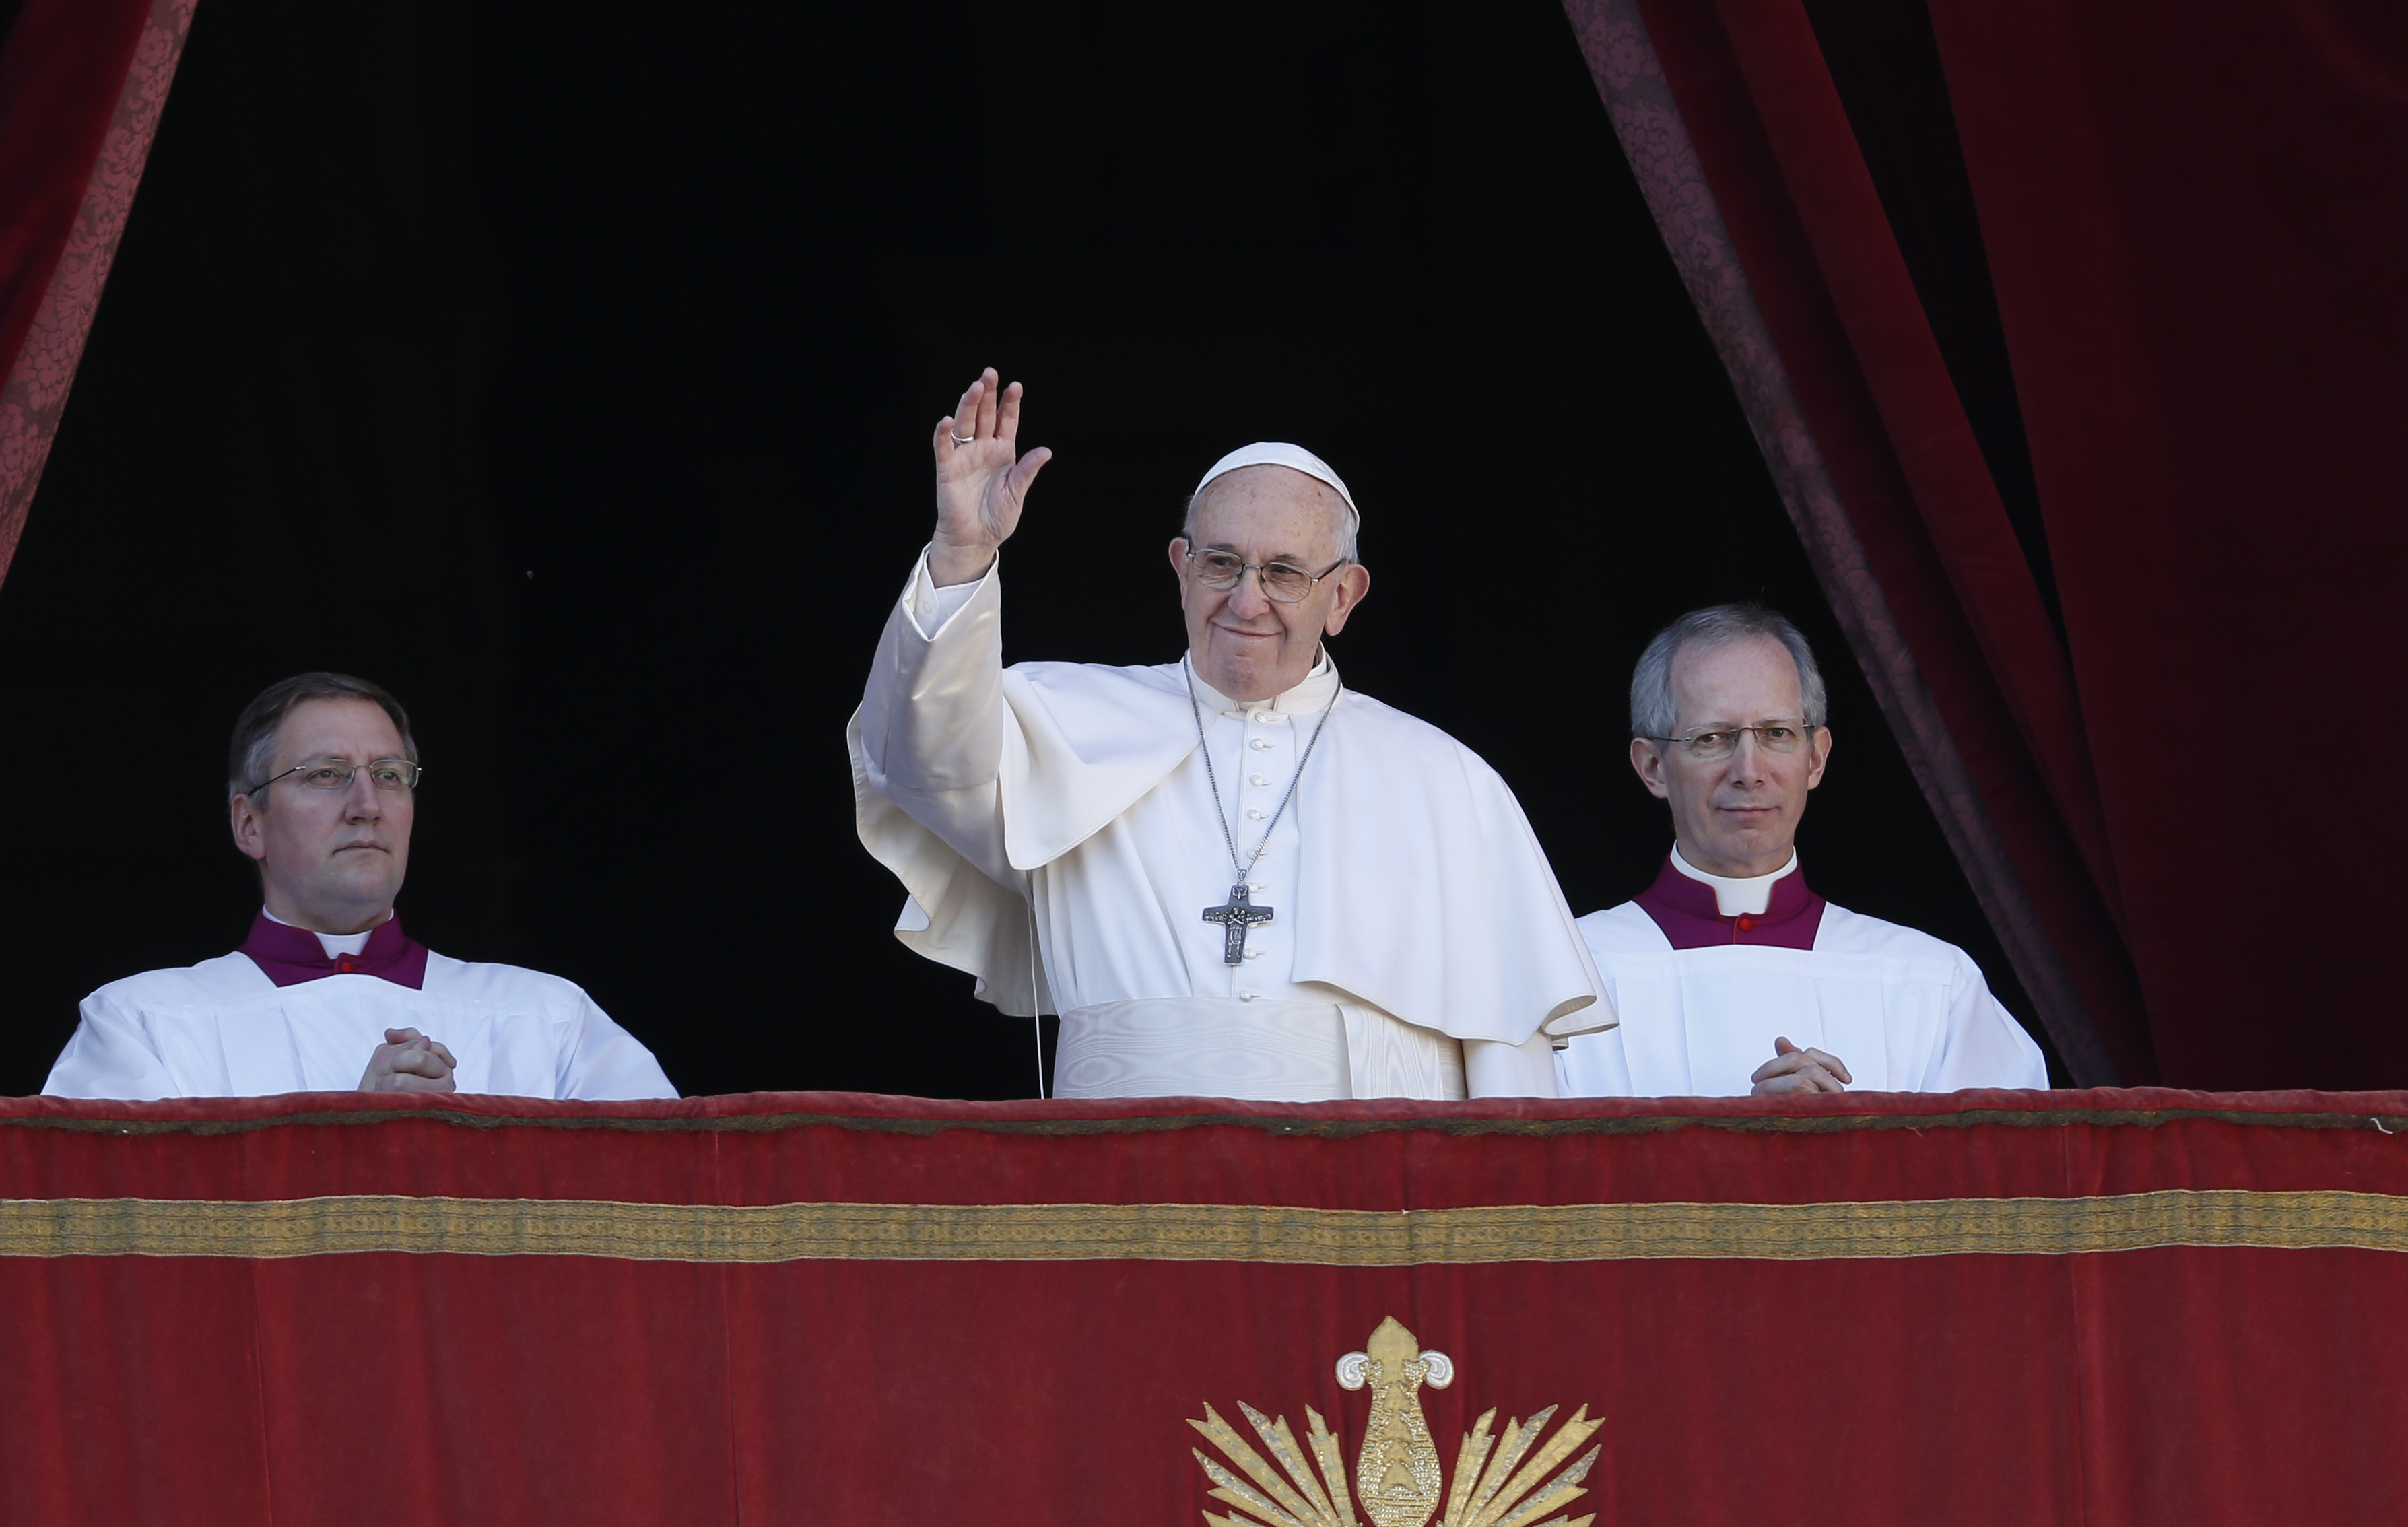 In Christmas message, pope prays for peace, brotherhood